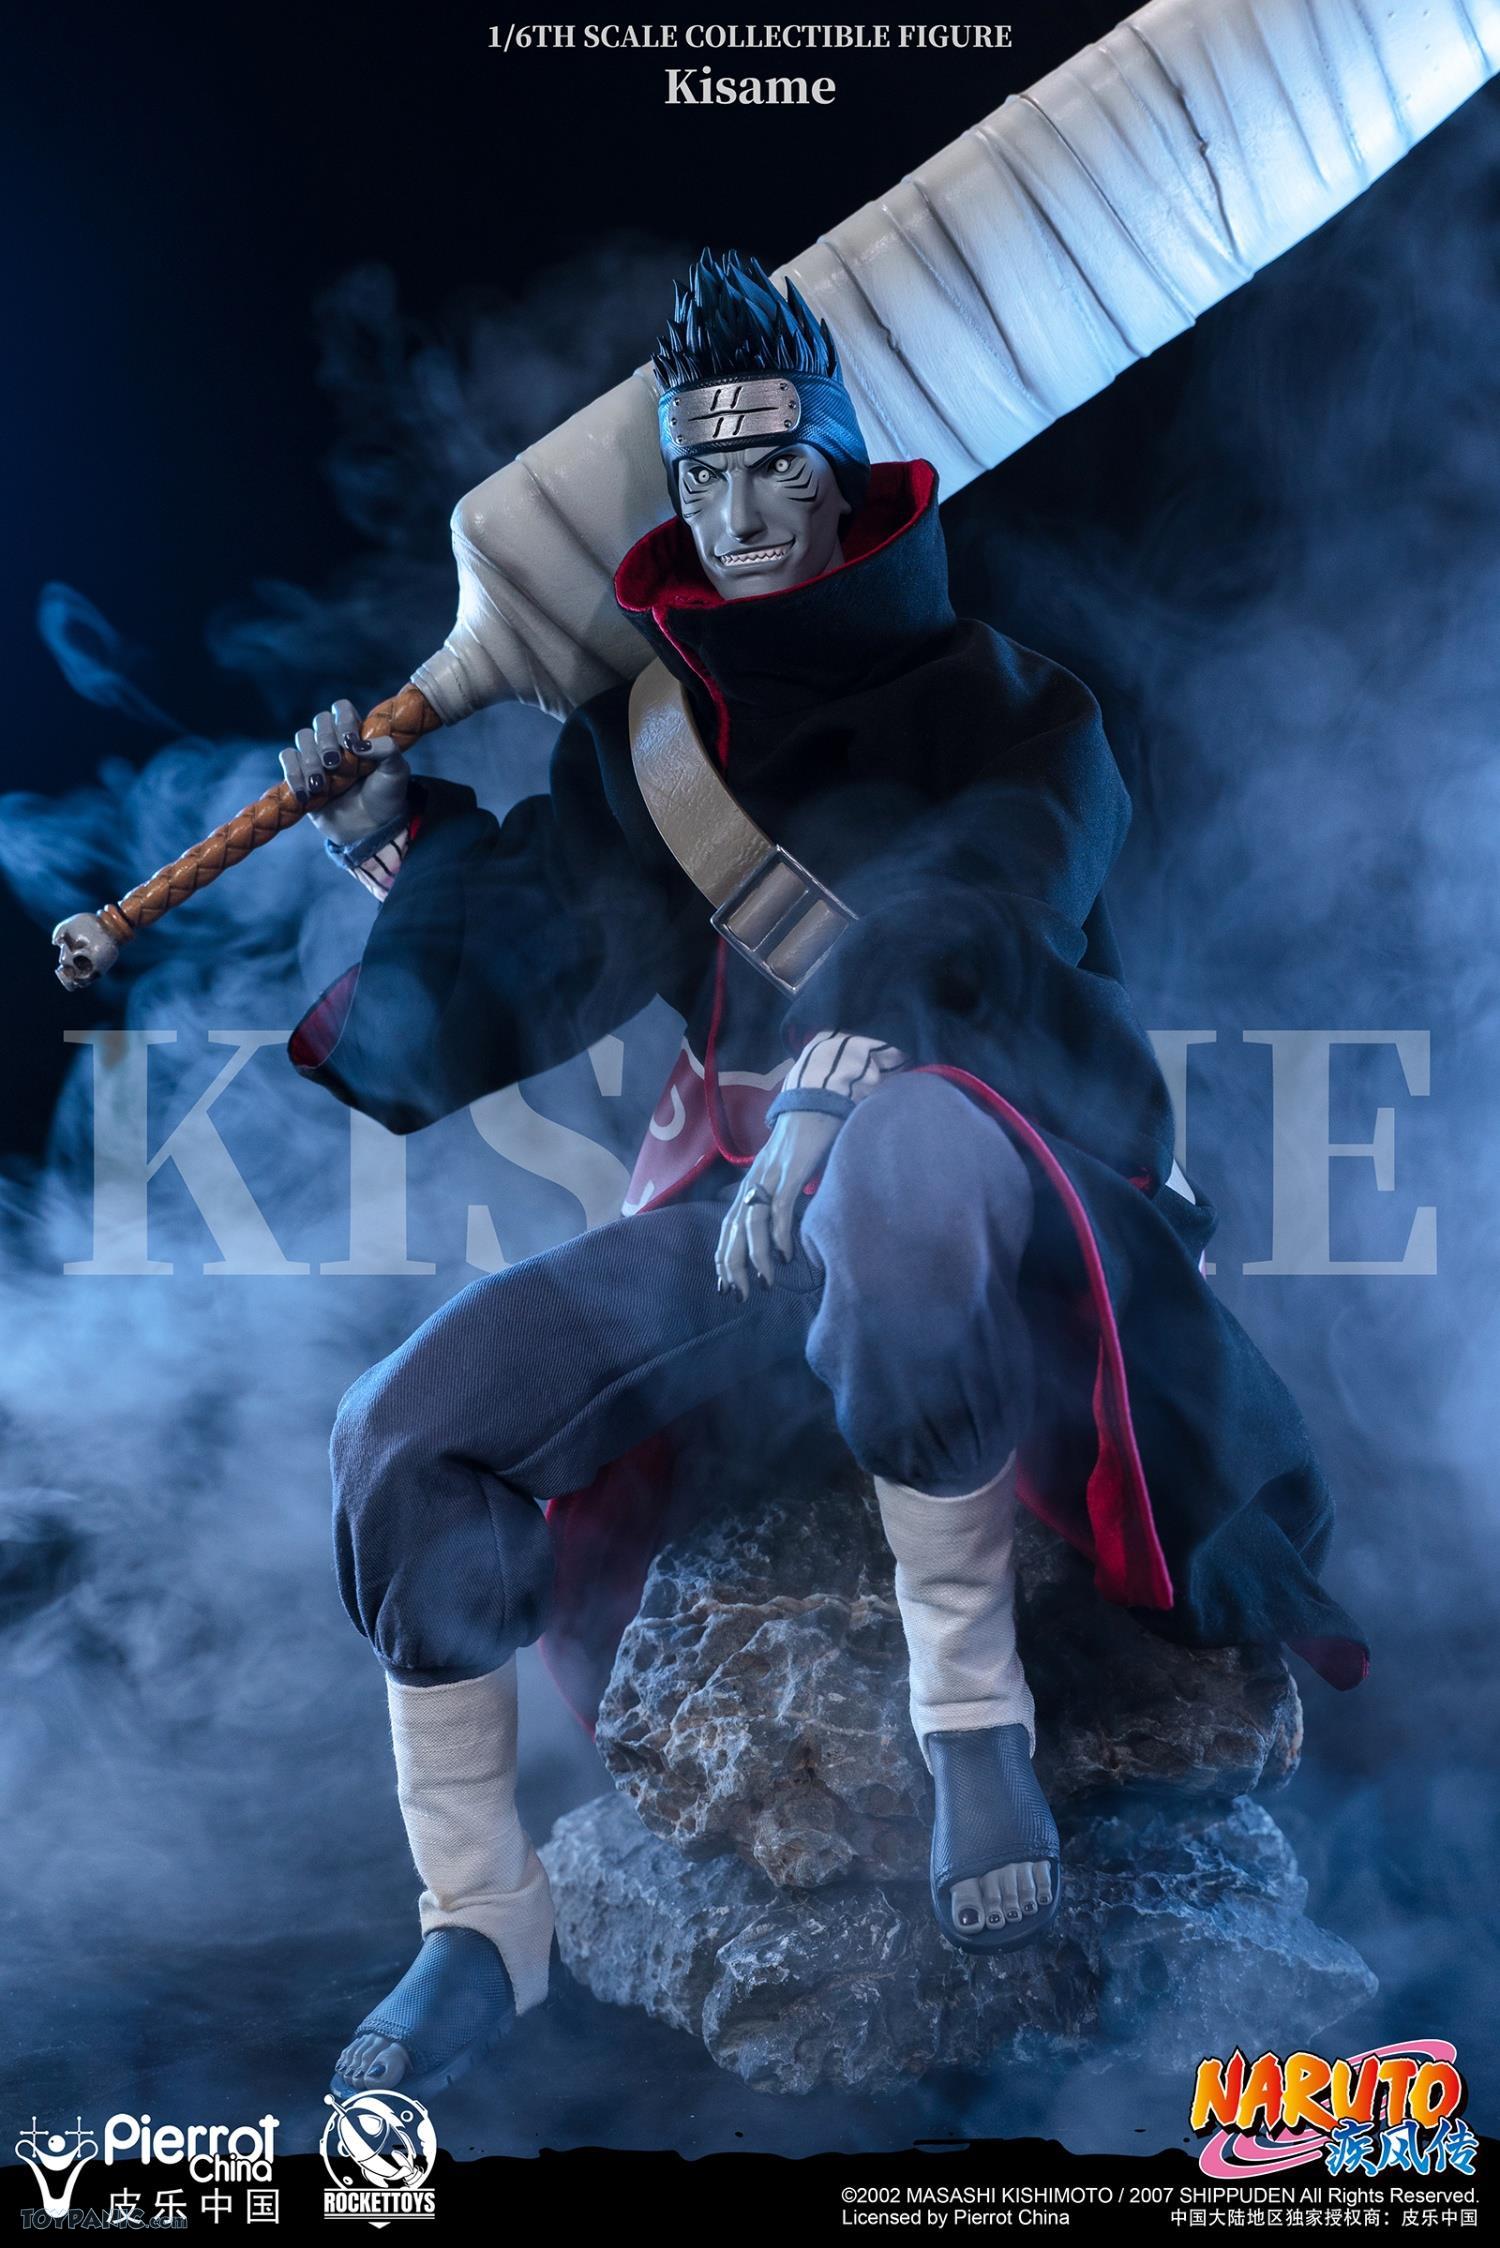 Fantasy - NEW PRODUCT: Rocket Toys ROC-007 1/6 Scale Kisame 221202460434PM_5686661